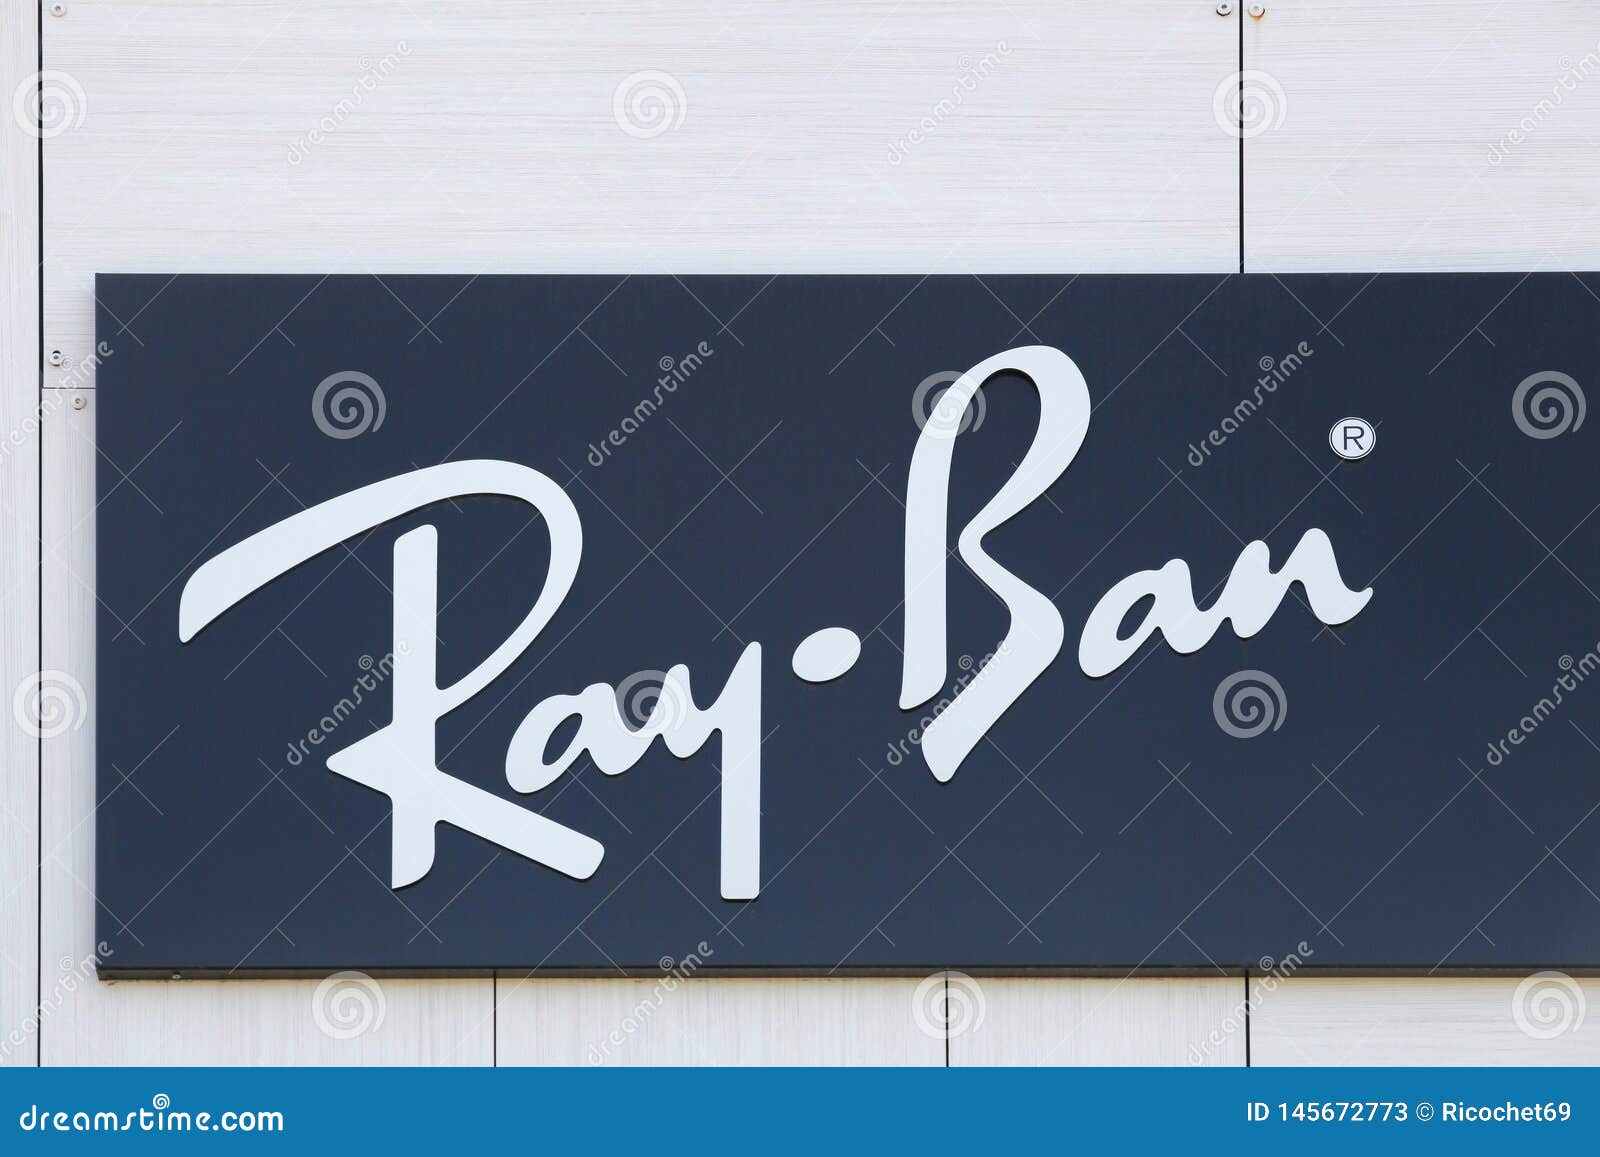 Ray Ban logo on a wall editorial stock photo. Image of shop - 145672773